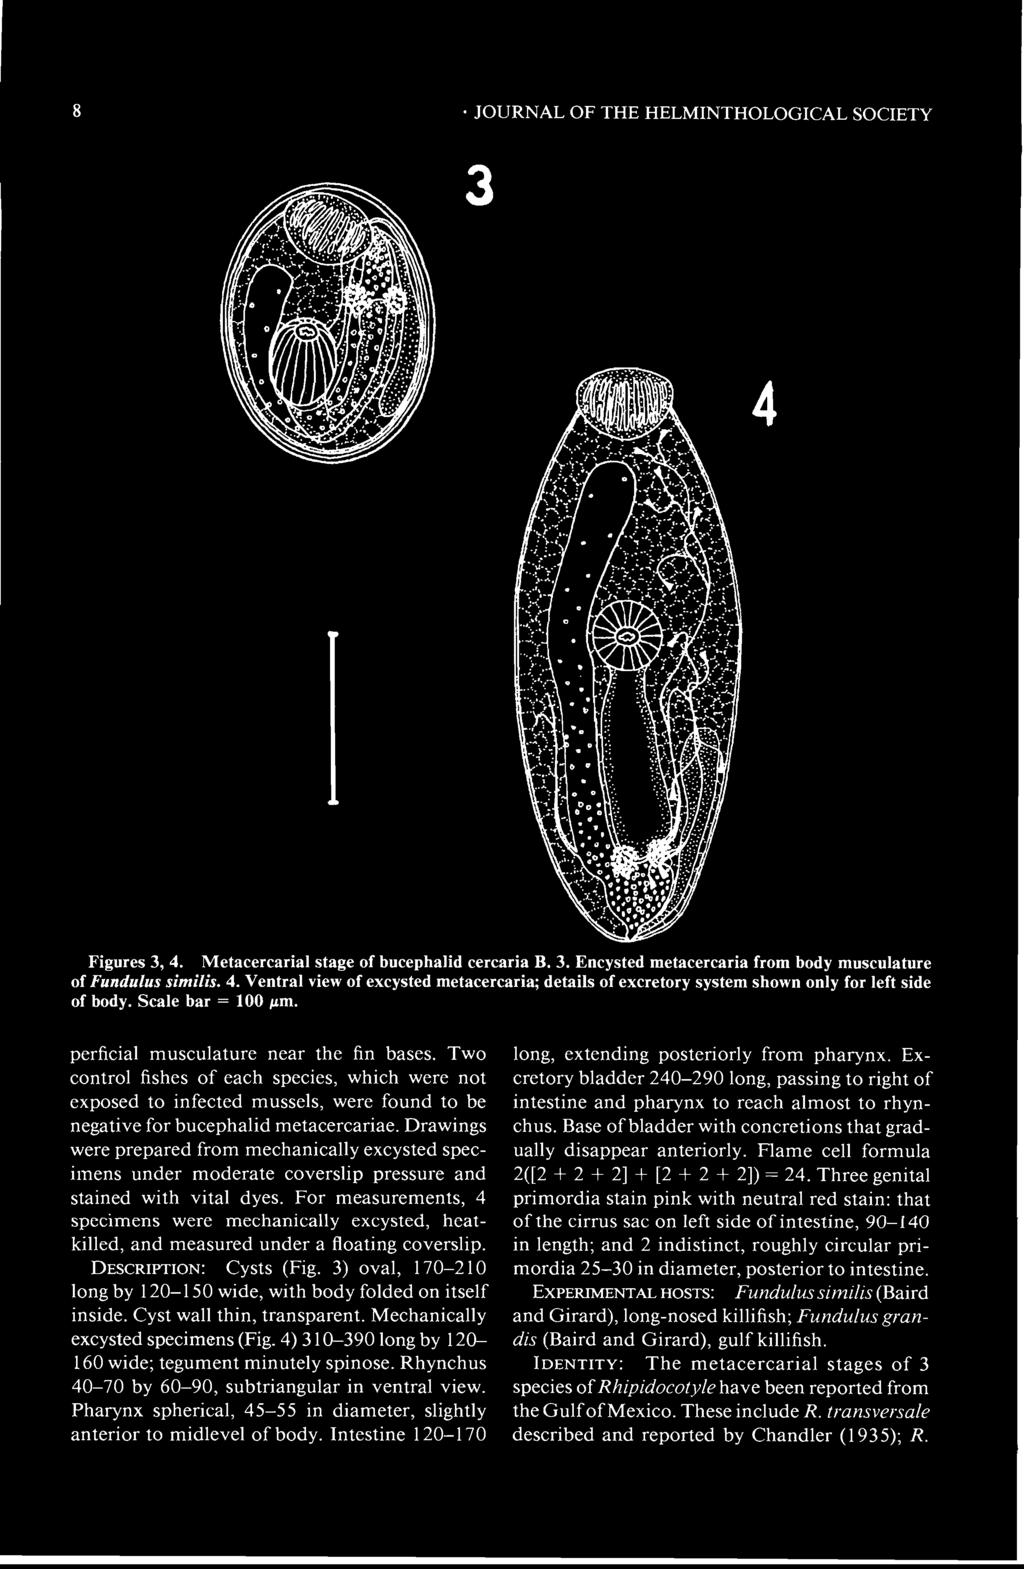 JOURNAL OF THE HELMINTHOLOGICAL SOCIETY Figures 3, 4. Metacercarial stage of bucephalid cercaria B. 3. Encysted metacercaria from body musculature of Fundulus similis. 4. Ventral view of excysted metacercaria; details of excretory system shown only for left side of body.